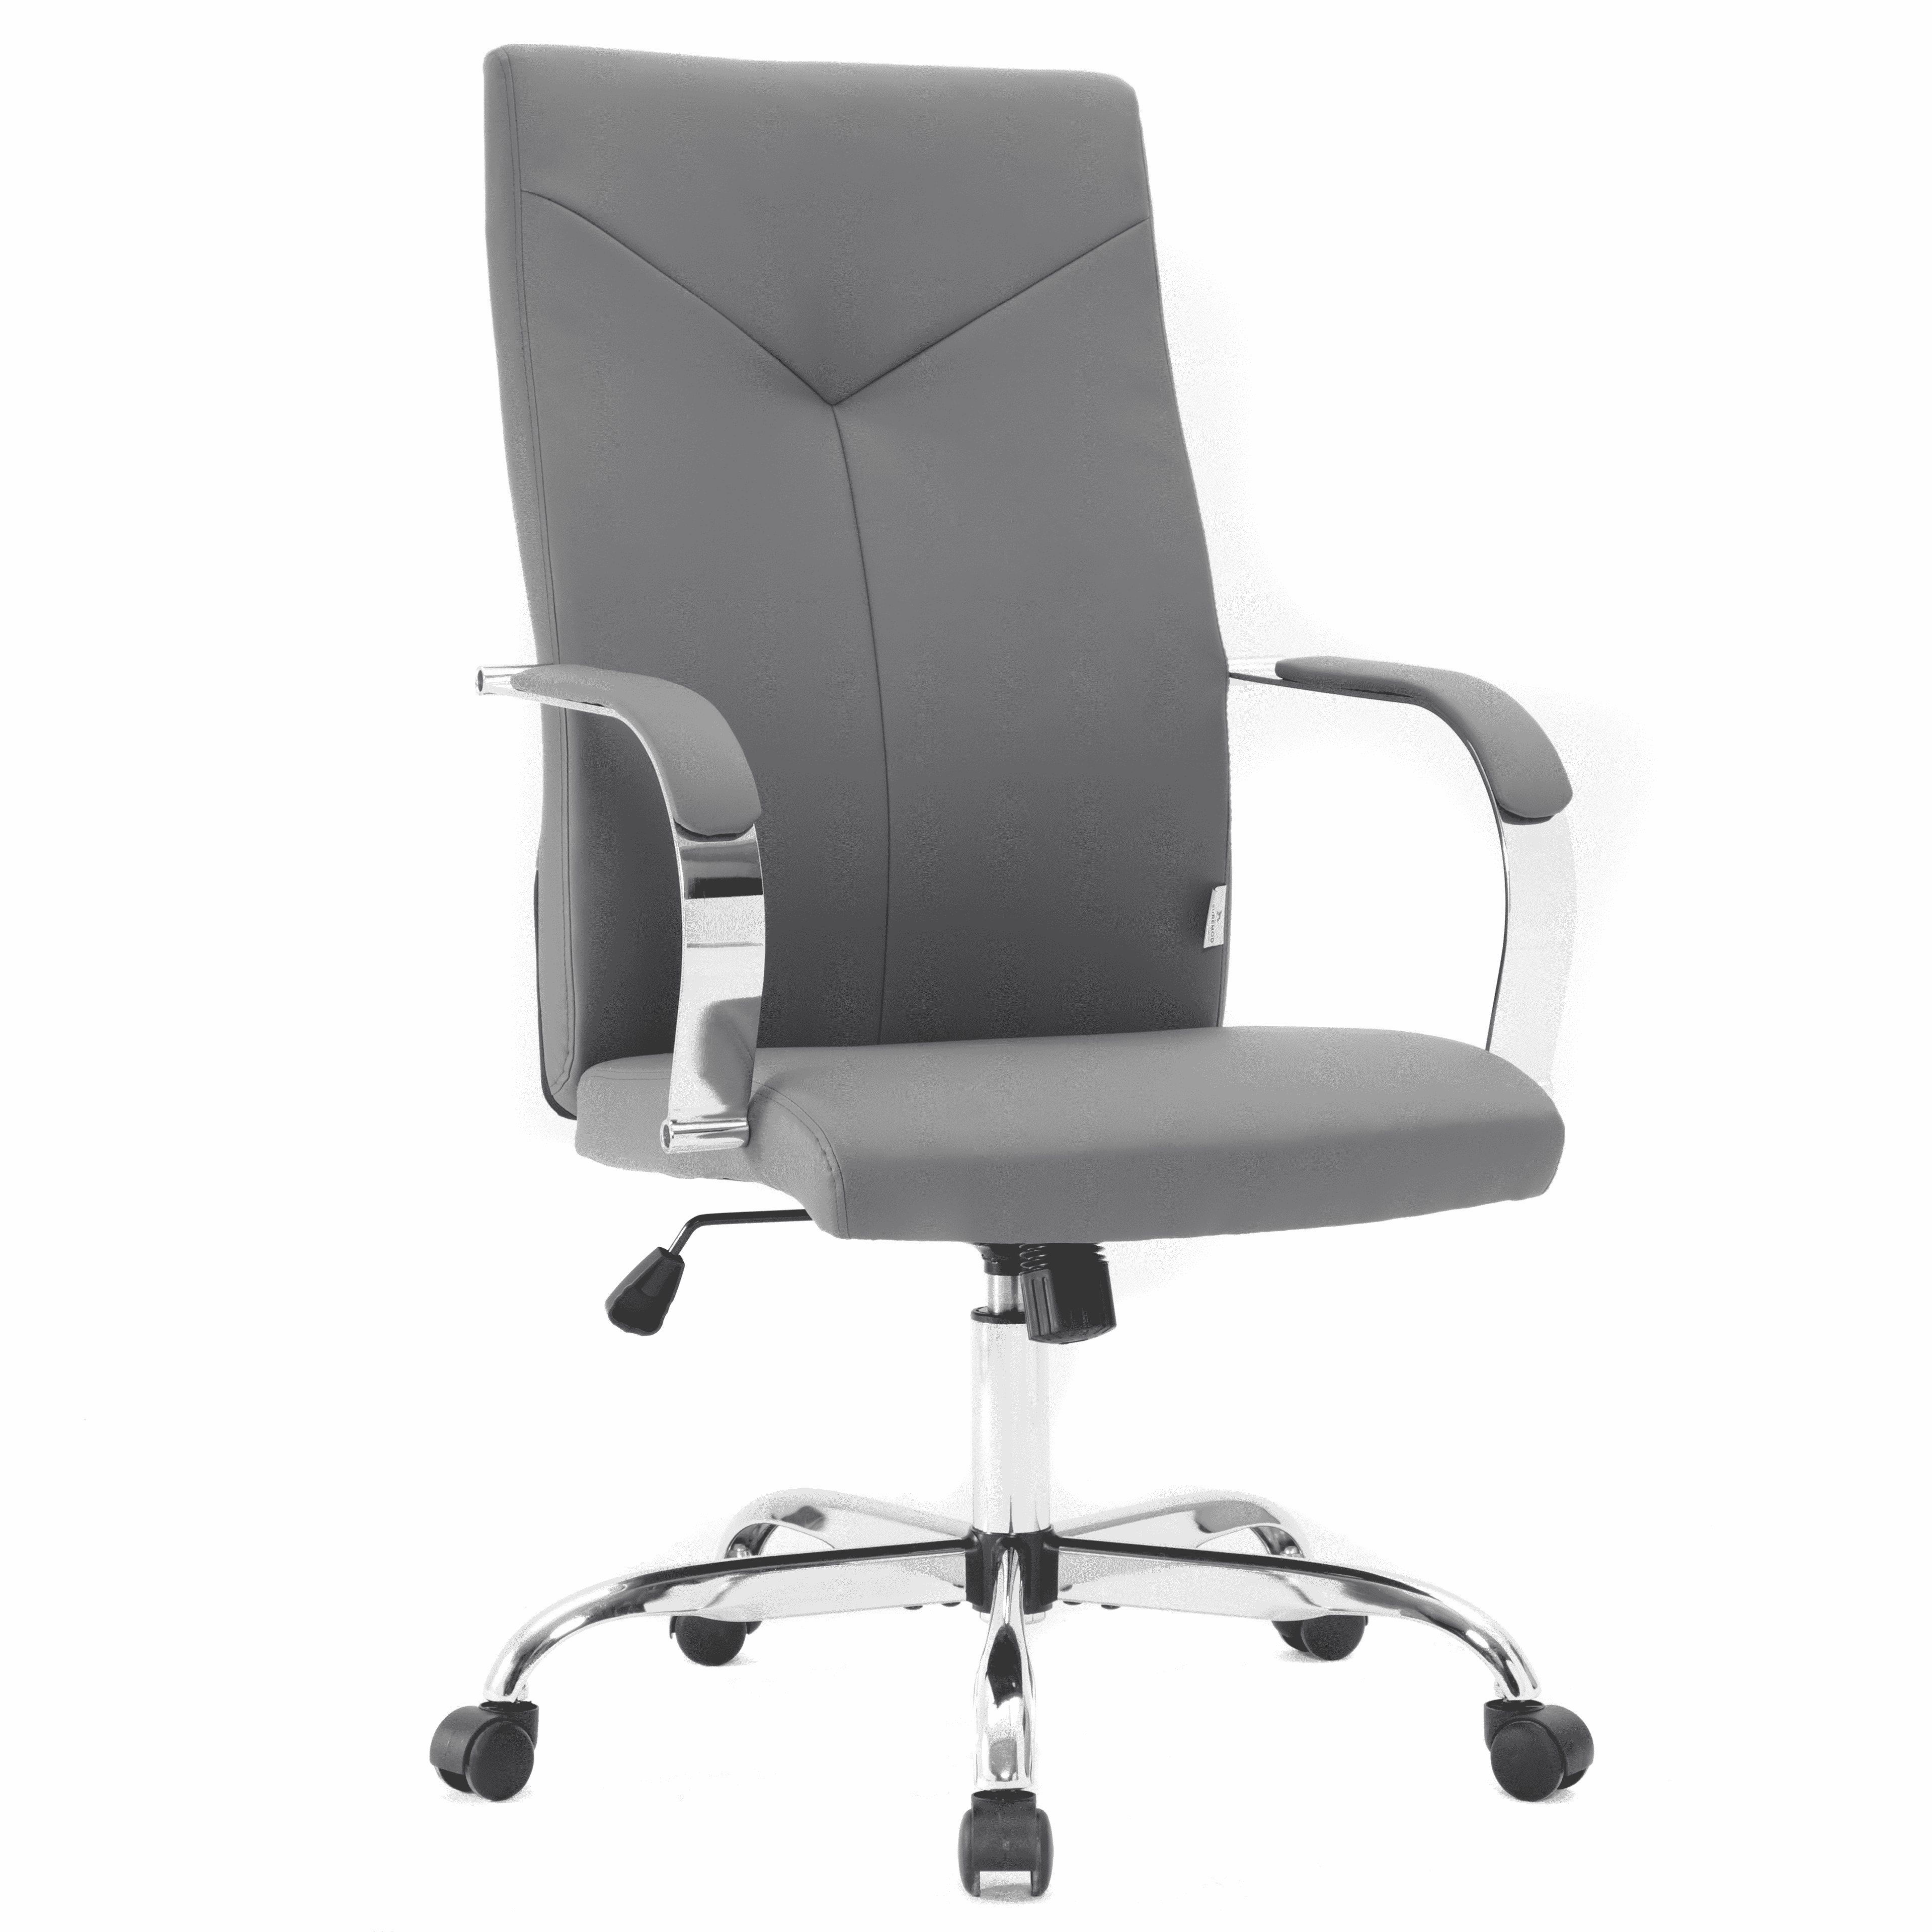 Sonora High-Back Executive Leather Swivel Chair in Gray